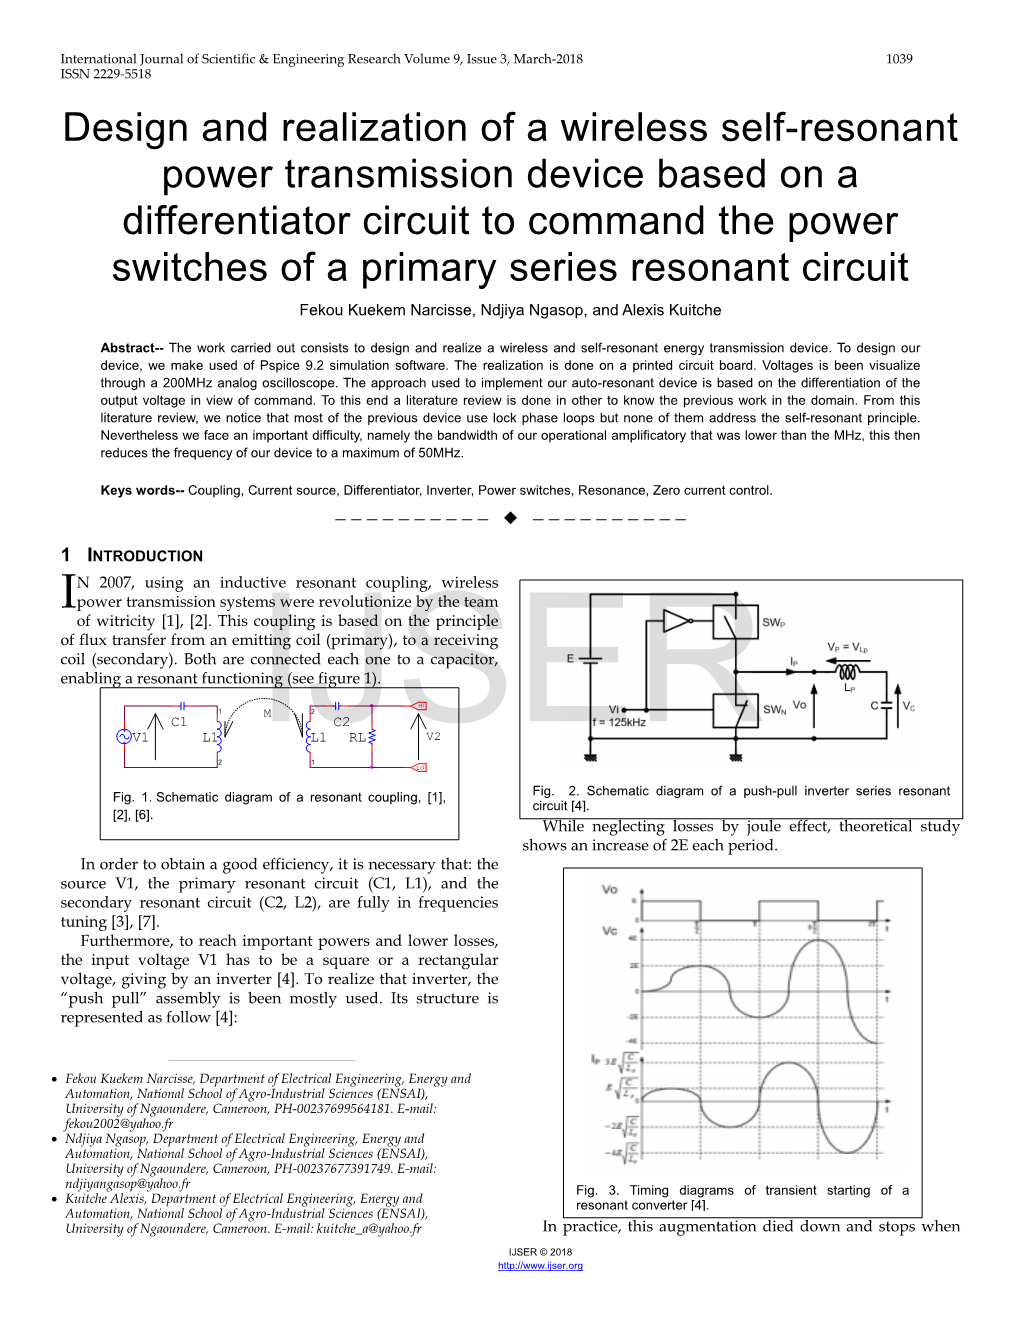 Design and Realization of a Wireless Self-Resonant Power Transmission